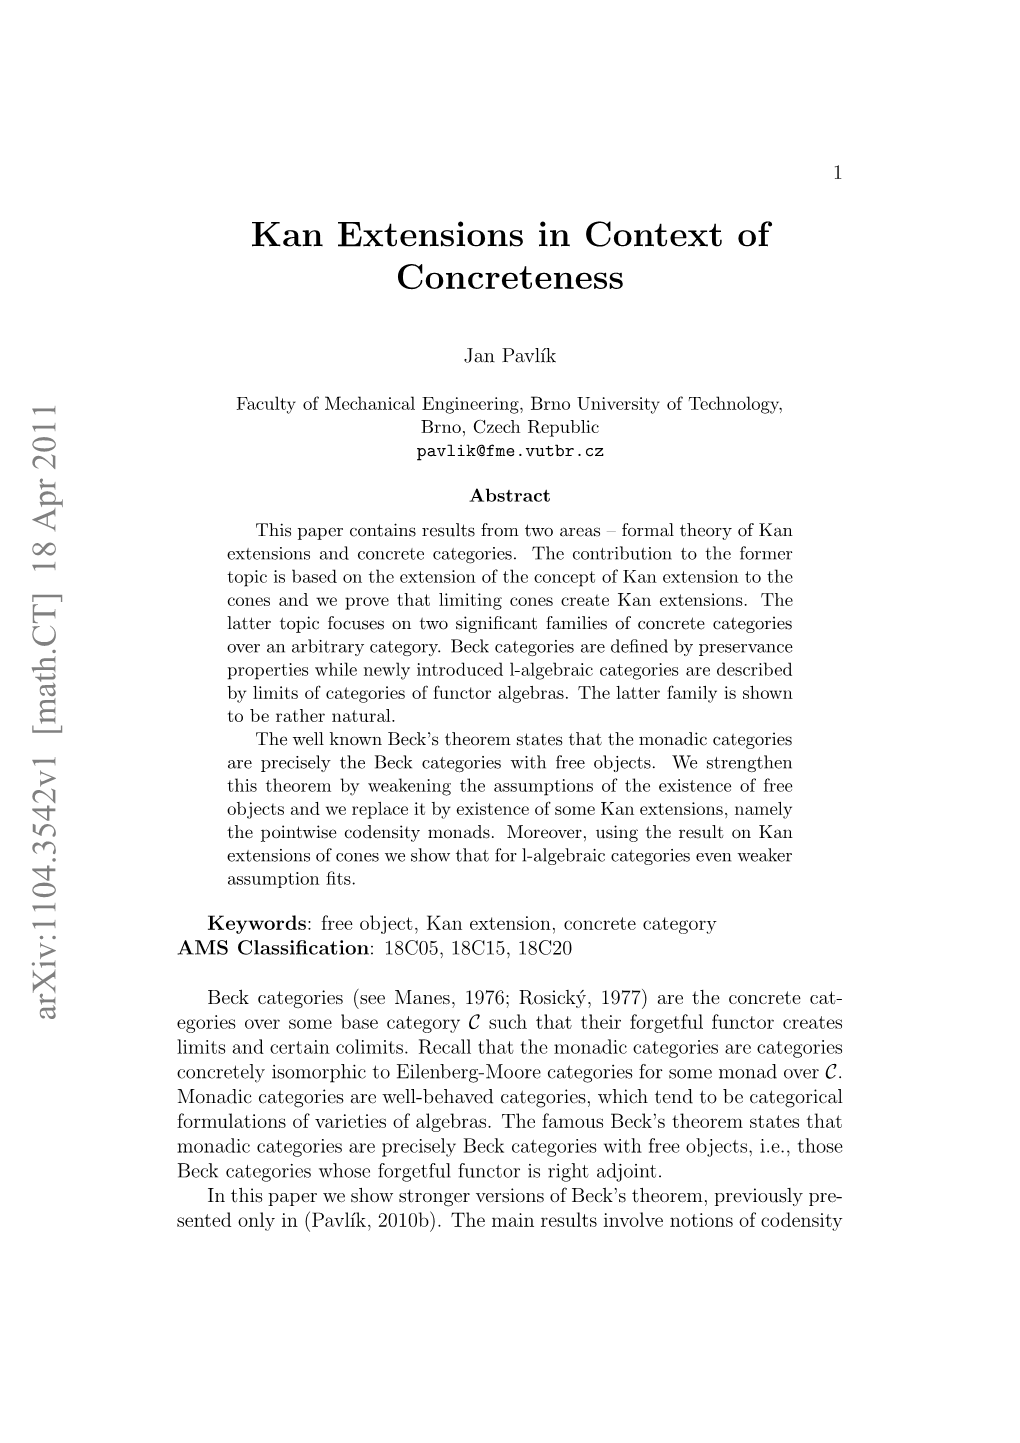 Kan Extensions in Context of Concreteness